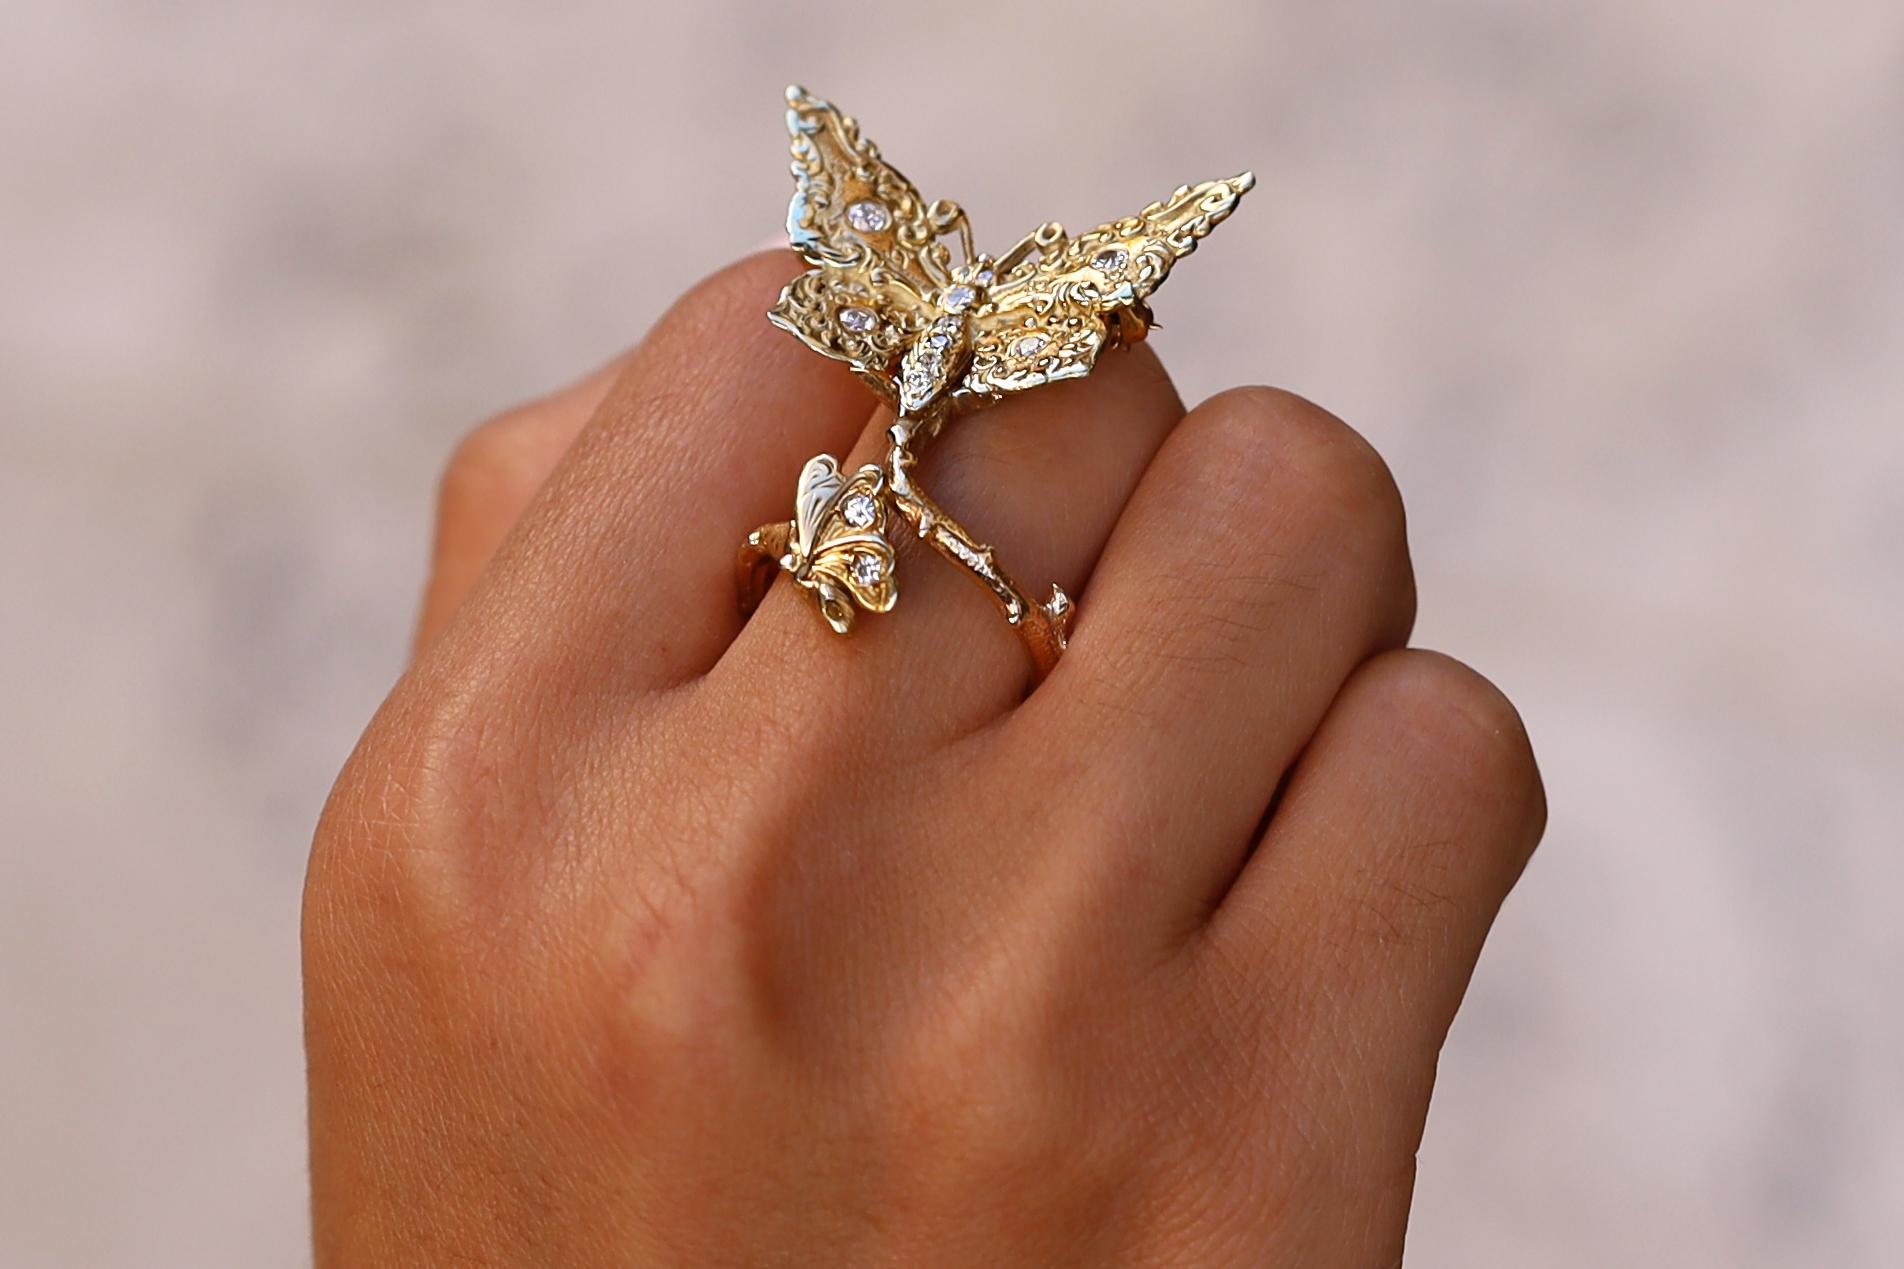 The perfect vintage accessory for those with a love of nature and whimsical creatures. Sustainable and earth friendly, this one of a kind butterfly jewel can easily be converted from a sweet ring into playful pin. Lovingly crafted with 14k yellow